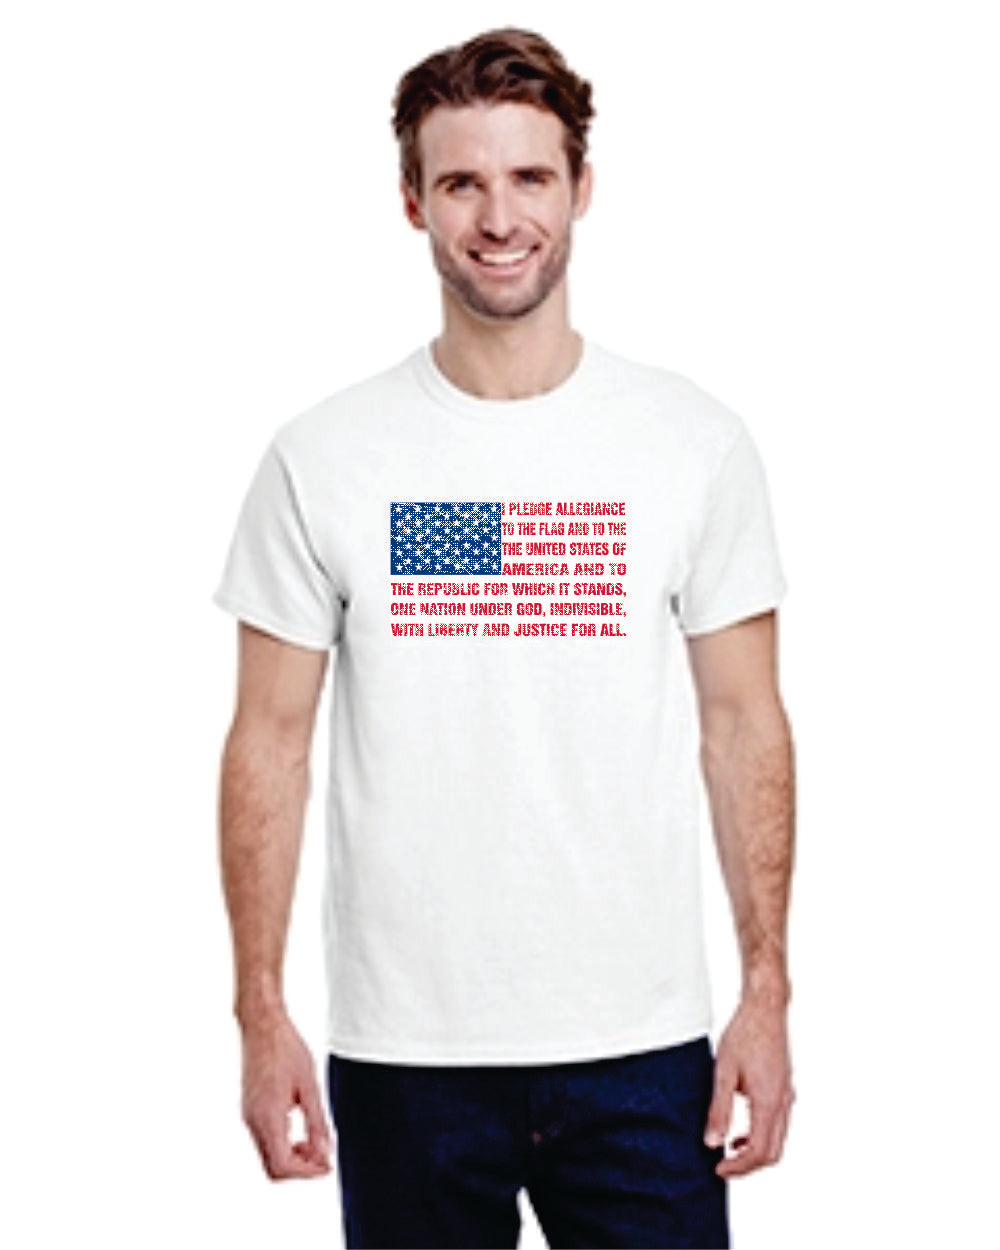 Pledge of Allegiance T-Shirt    *****FREE SHIPPING in the USA*****